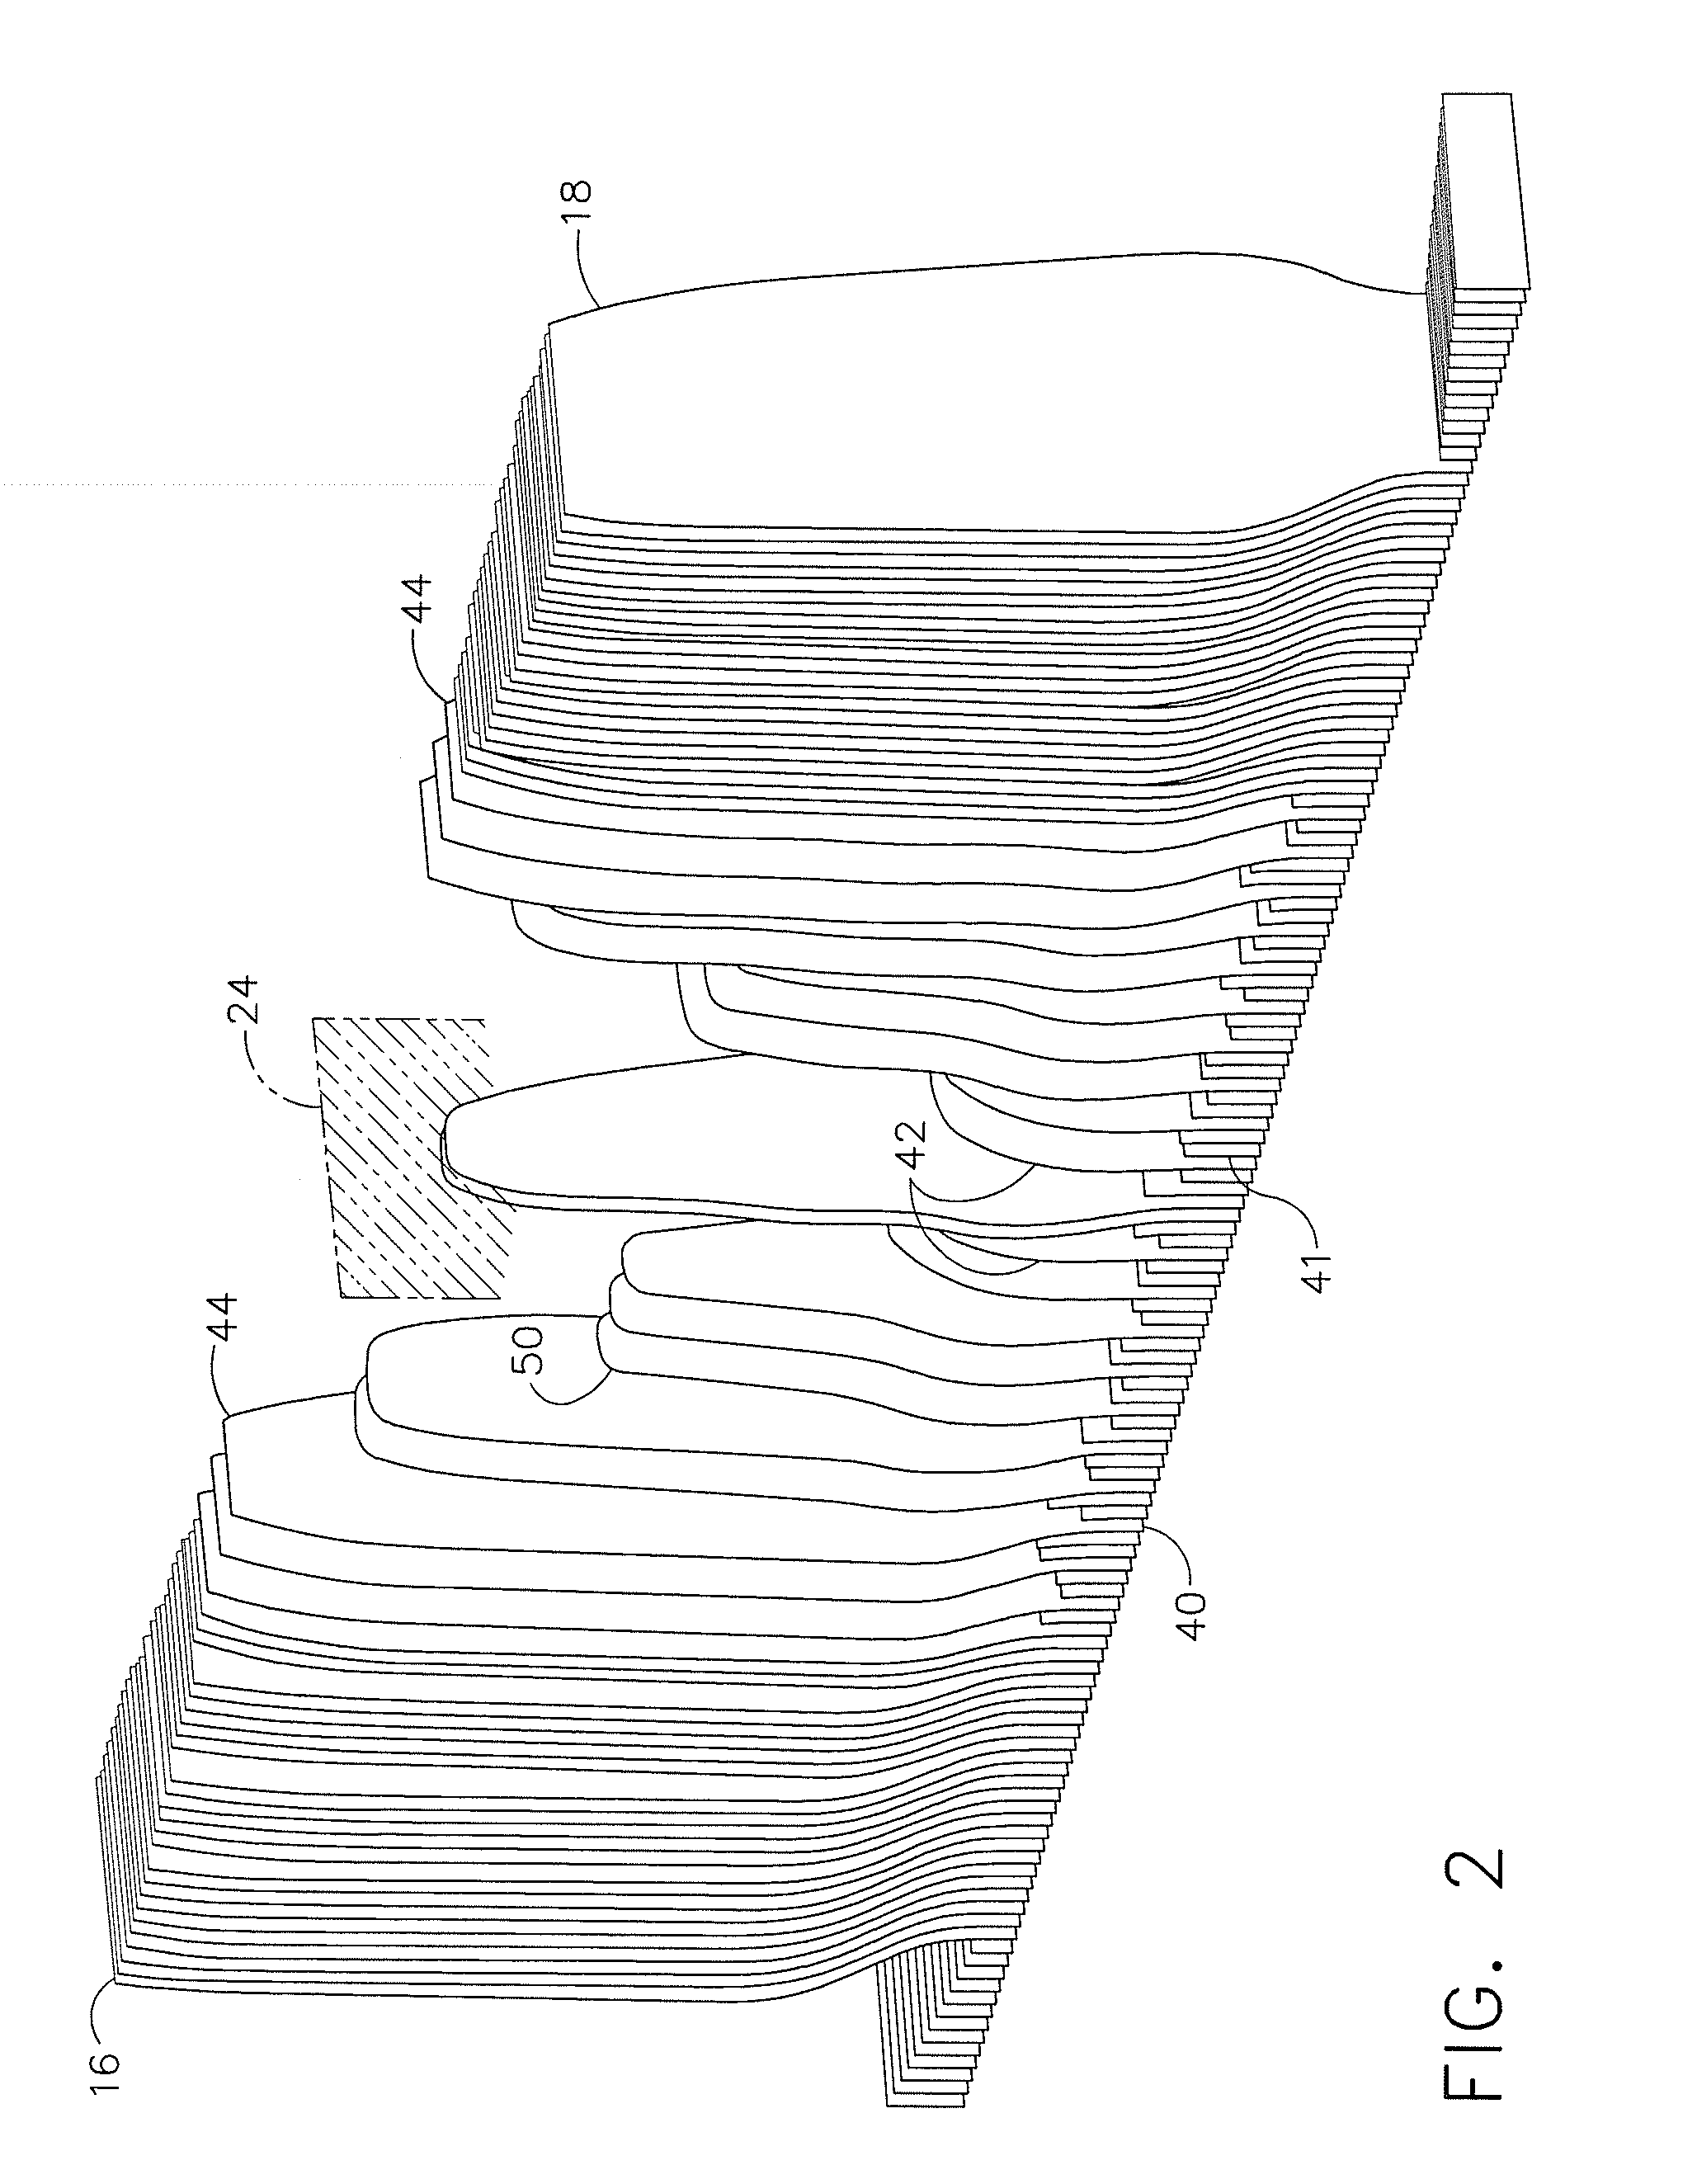 Method of manufacturing cmc articles having small complex features